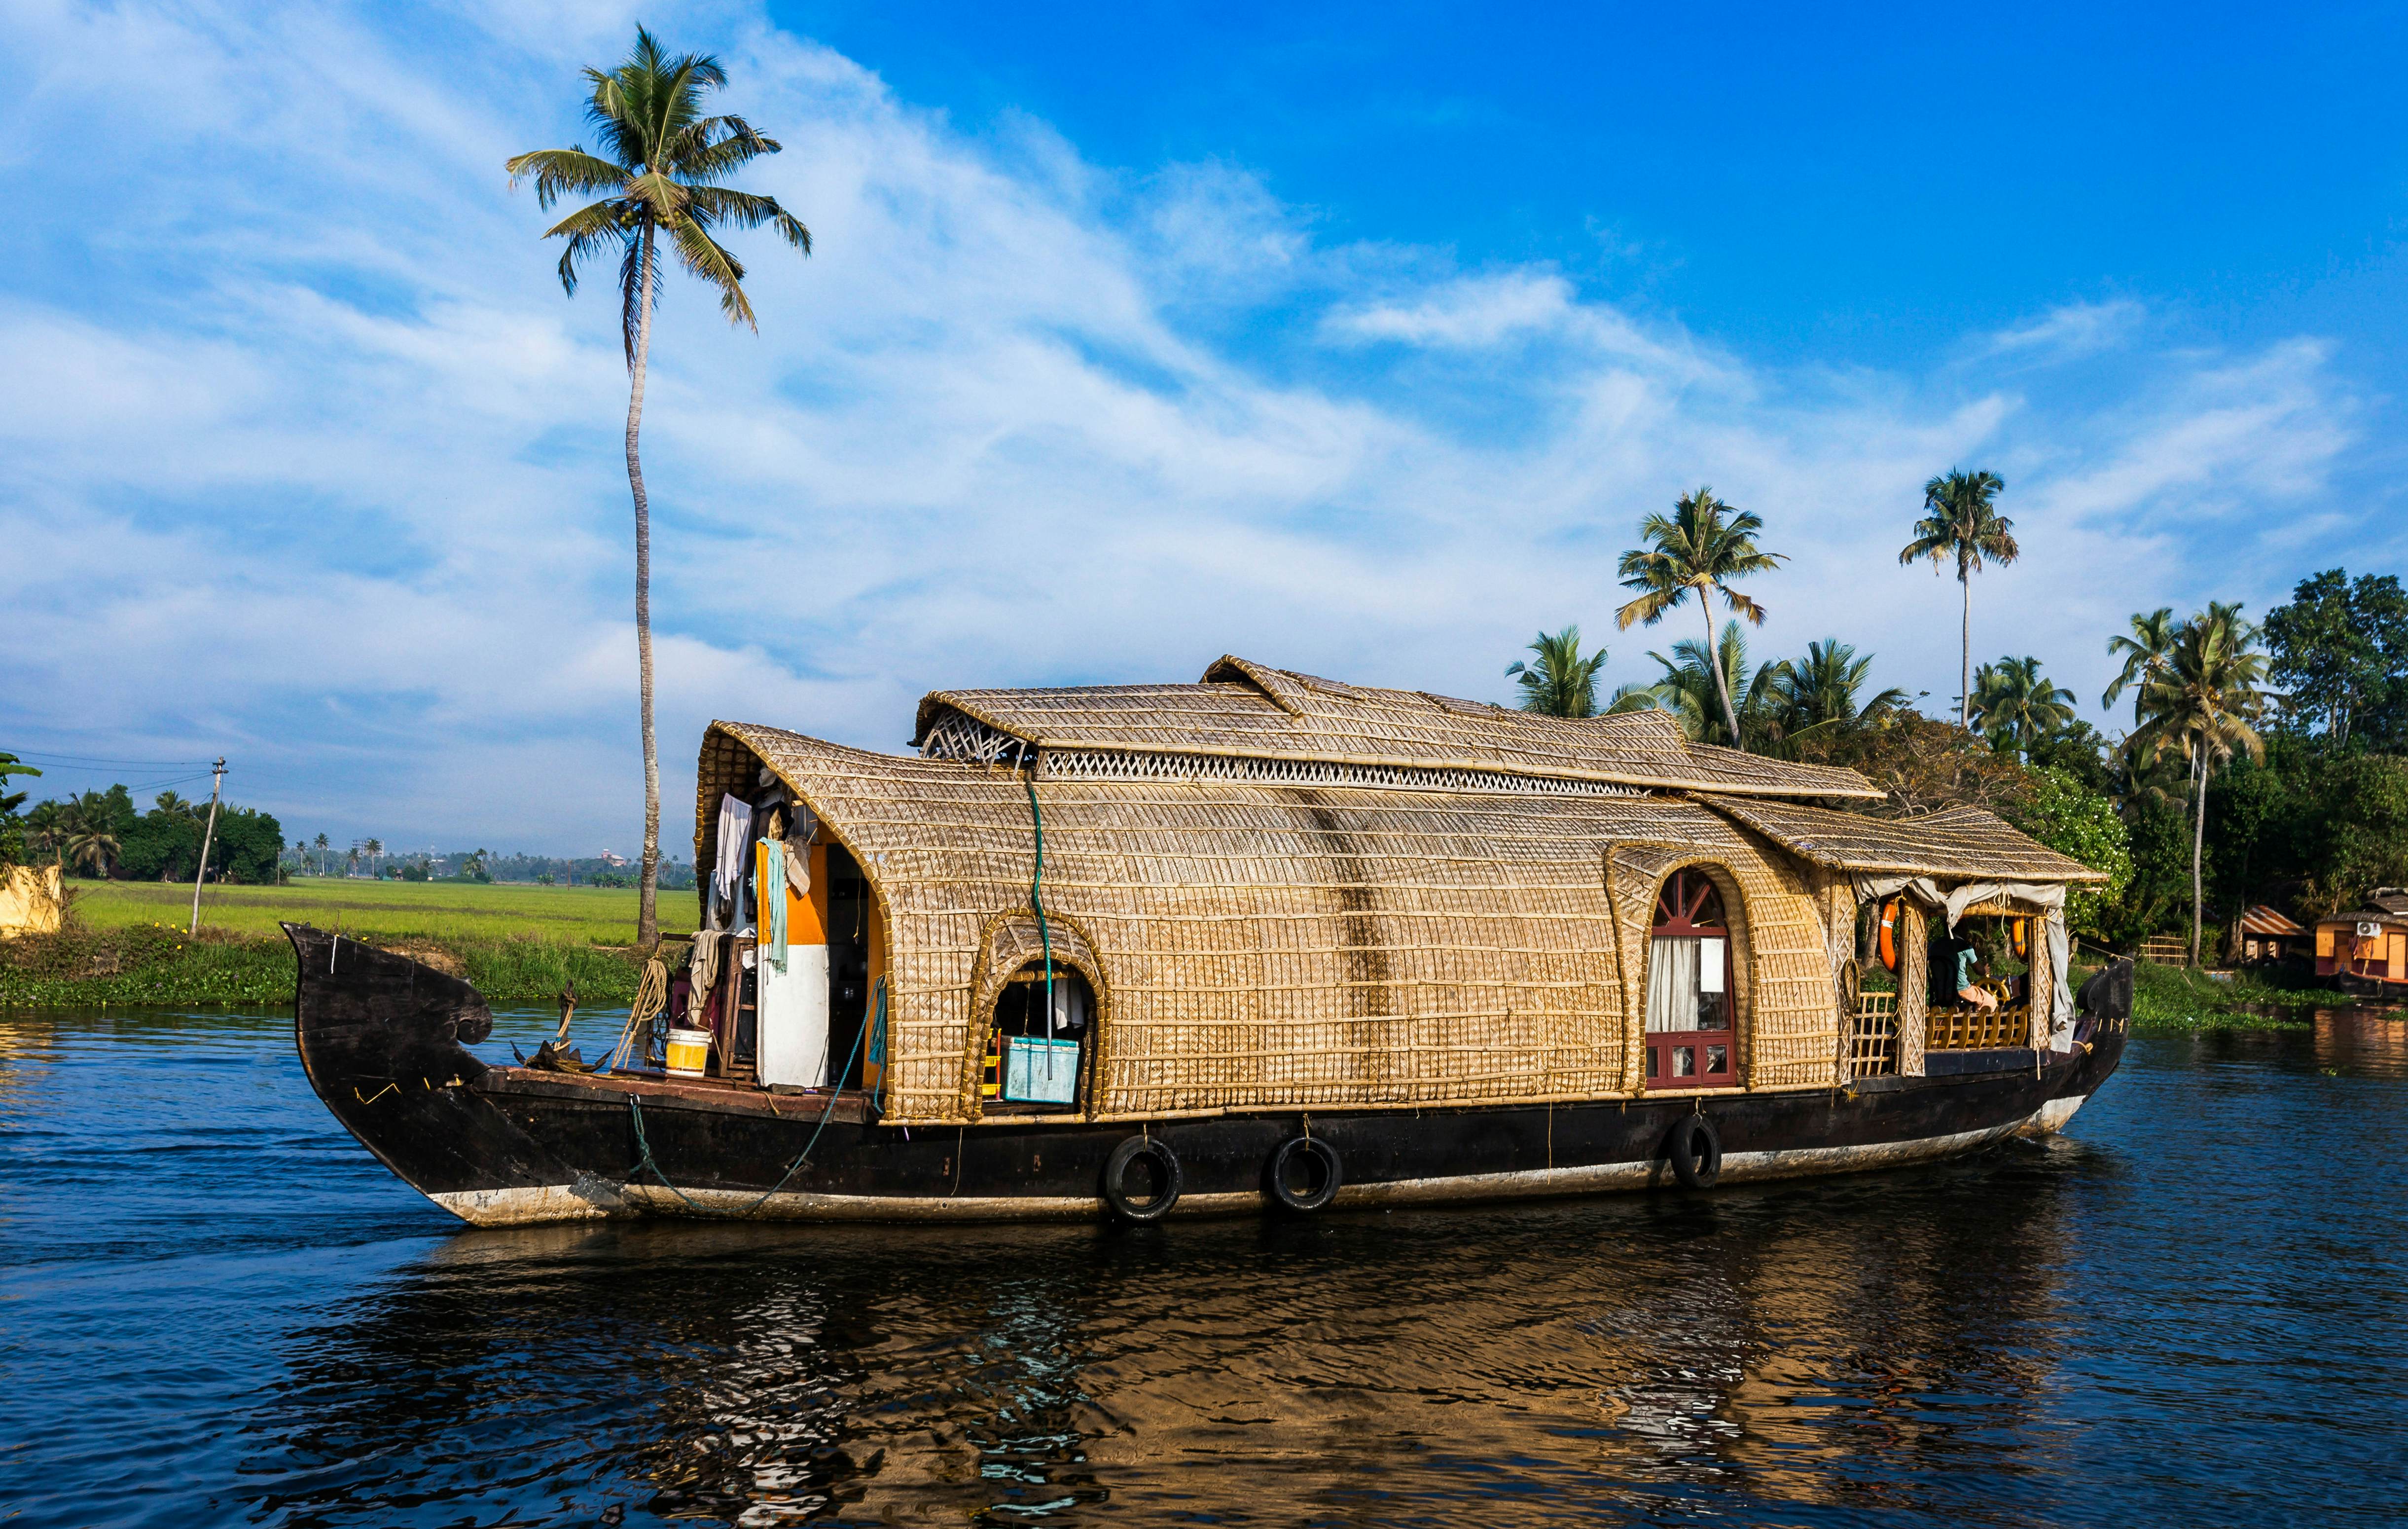 Should you visit Goa or Kerala? - Lonely Planet